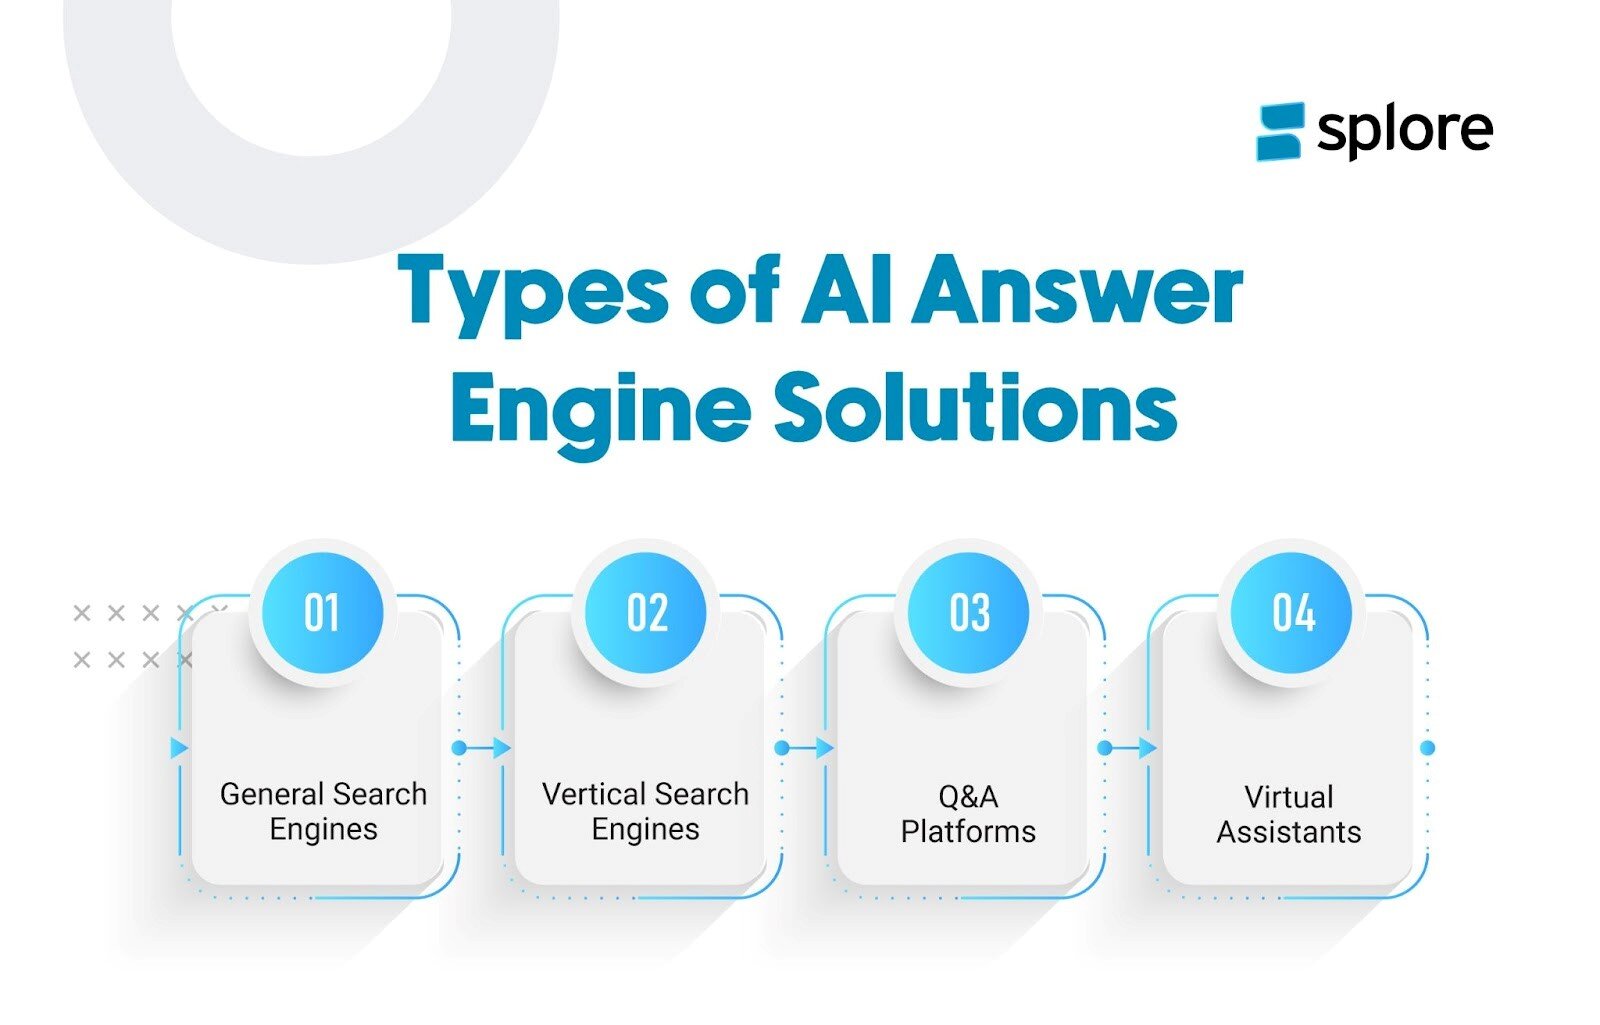 Types of AI Answer Engine Solutions